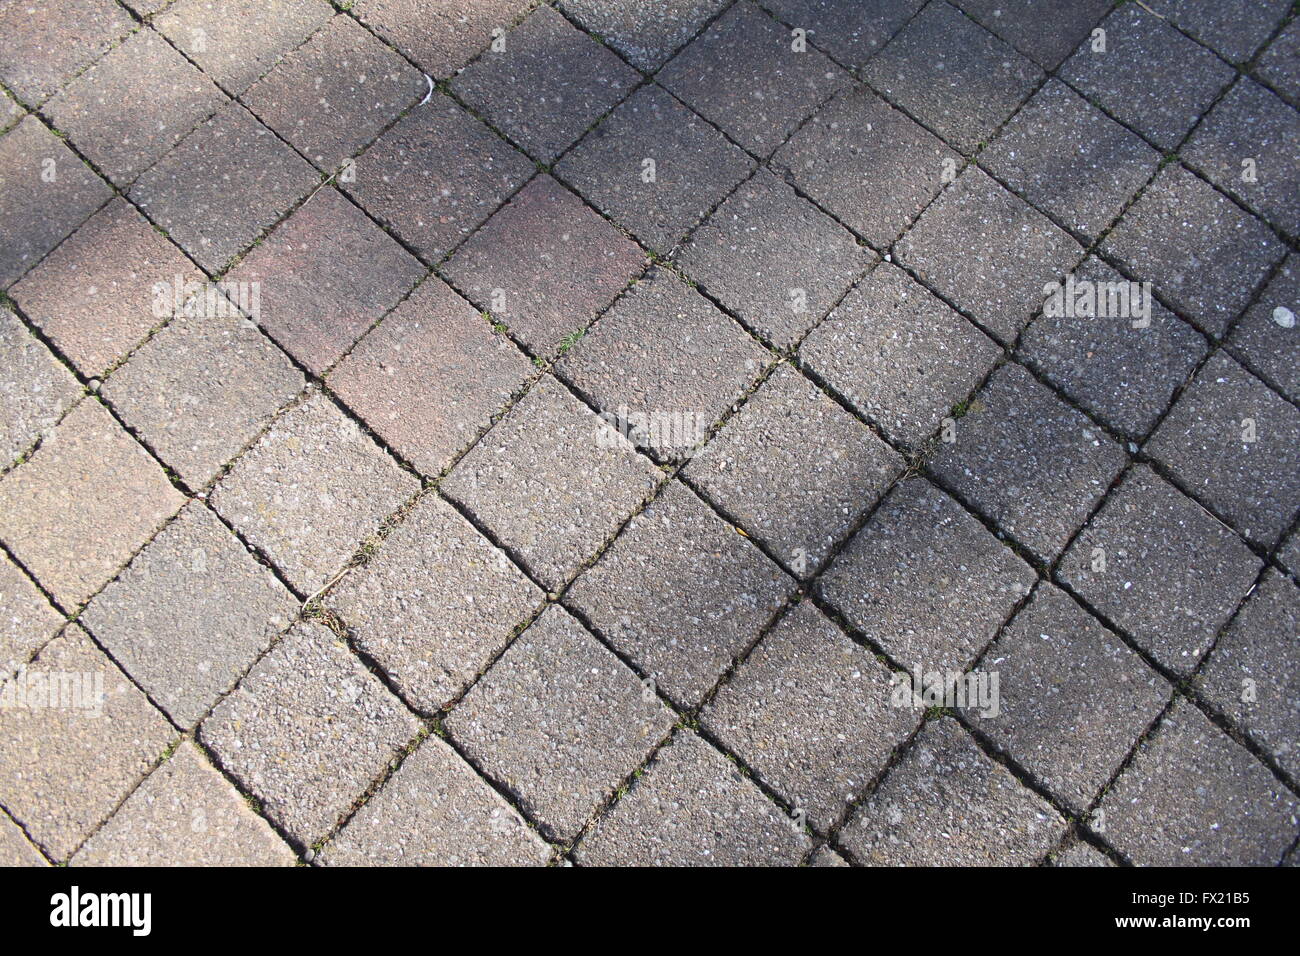 Skewed wide shot of square block paving stones showing shadow and perspective to add interest Stock Photo